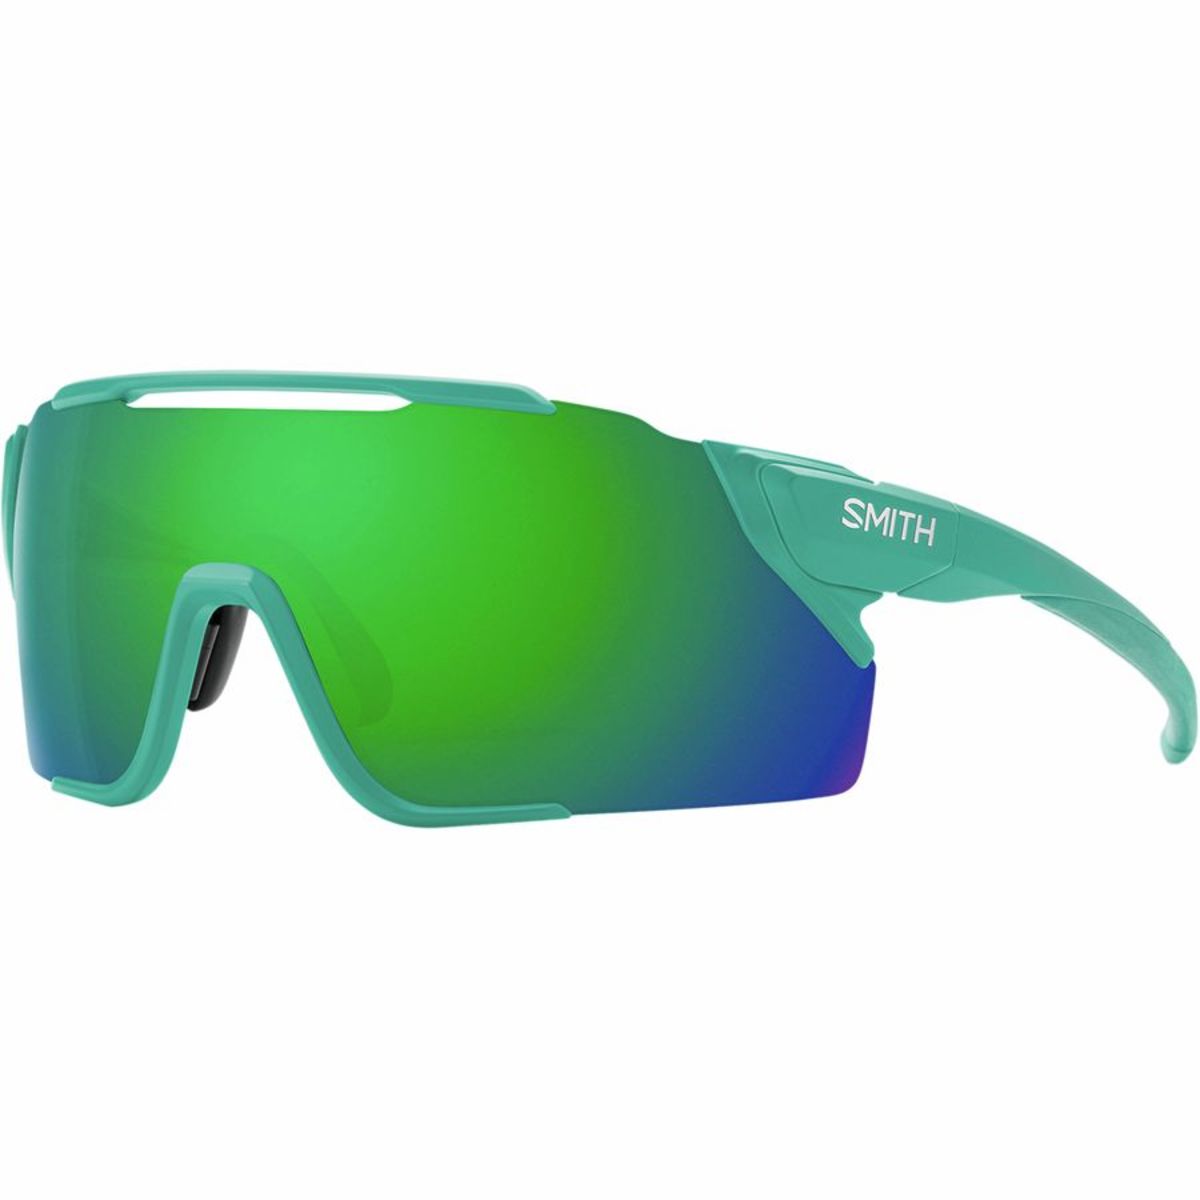 Polarized New Sport Wrap Driving Vision Sunglasses Blue High Definition  Glasses - Simpson Advanced Chiropractic & Medical Center